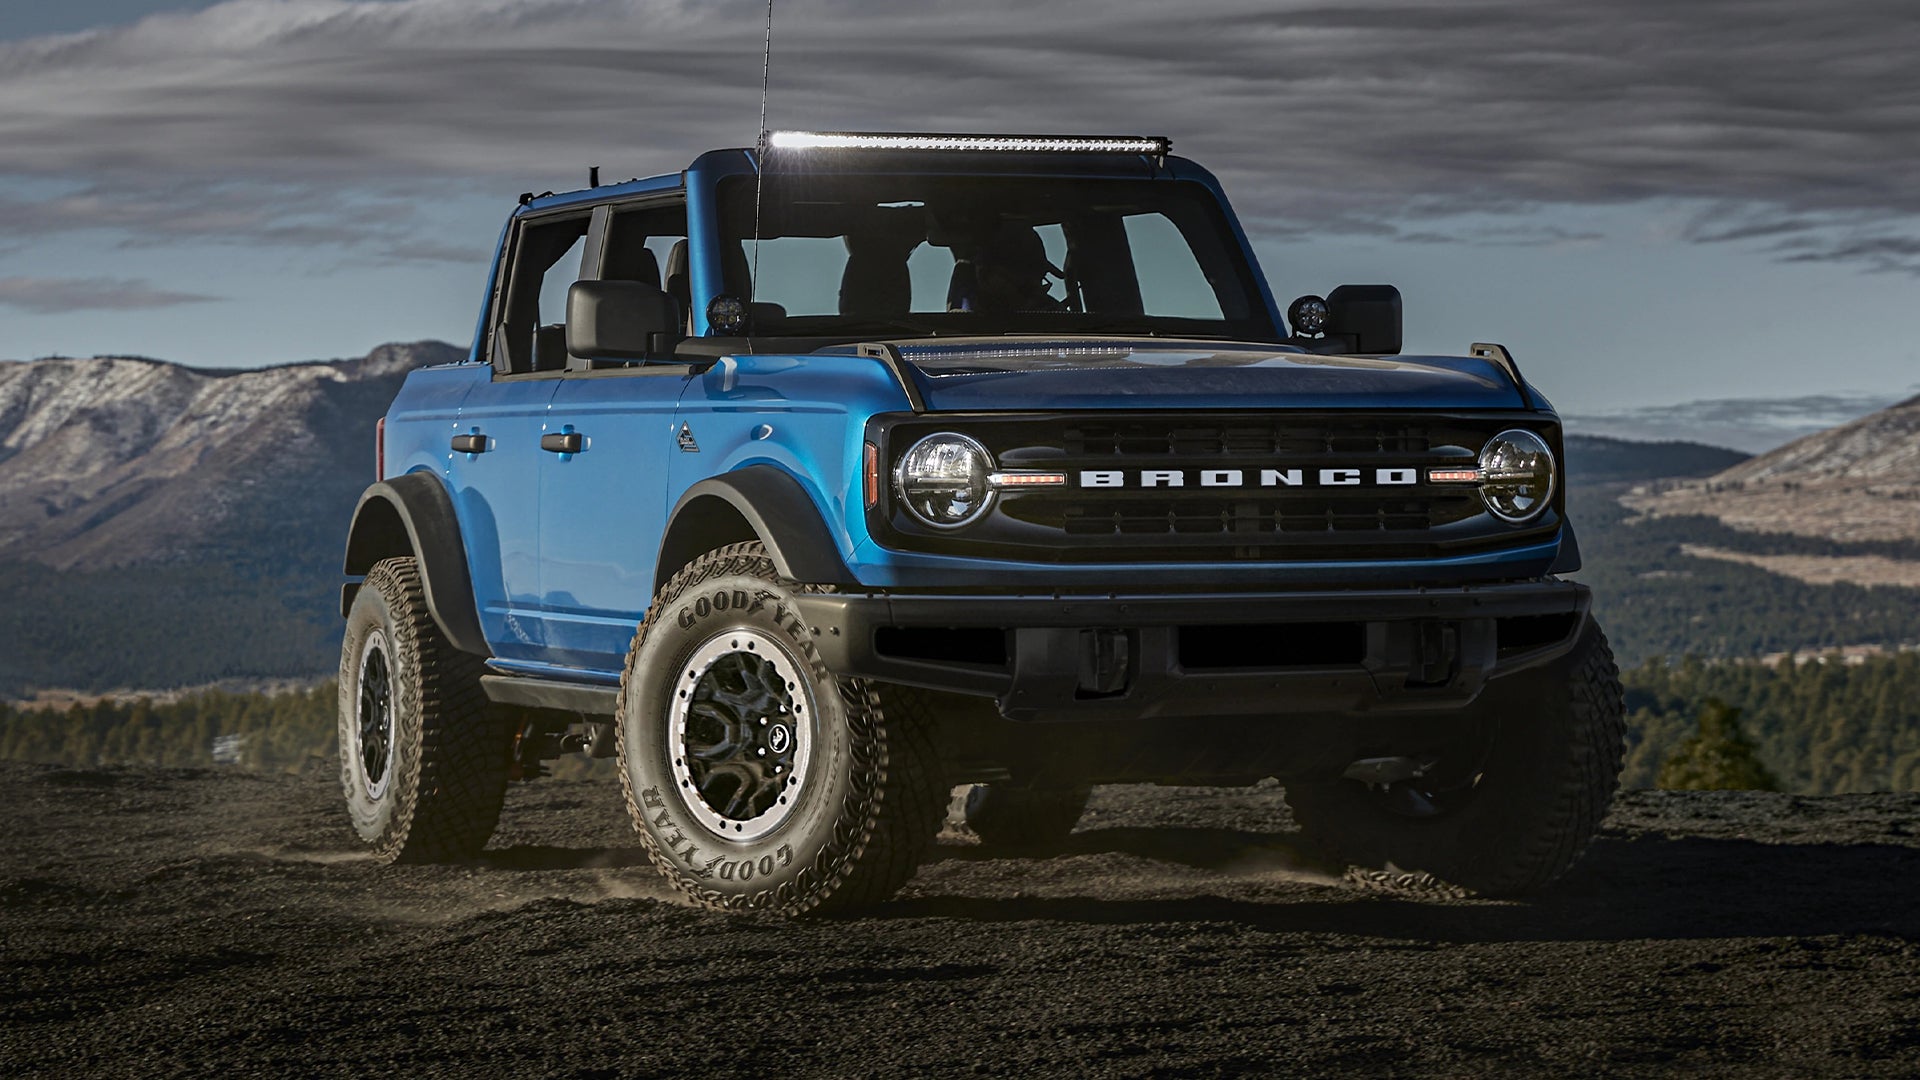 2021 Ford Bronco 2.7L With Sasquatch Pack Gets 17 MPG Combined EPA